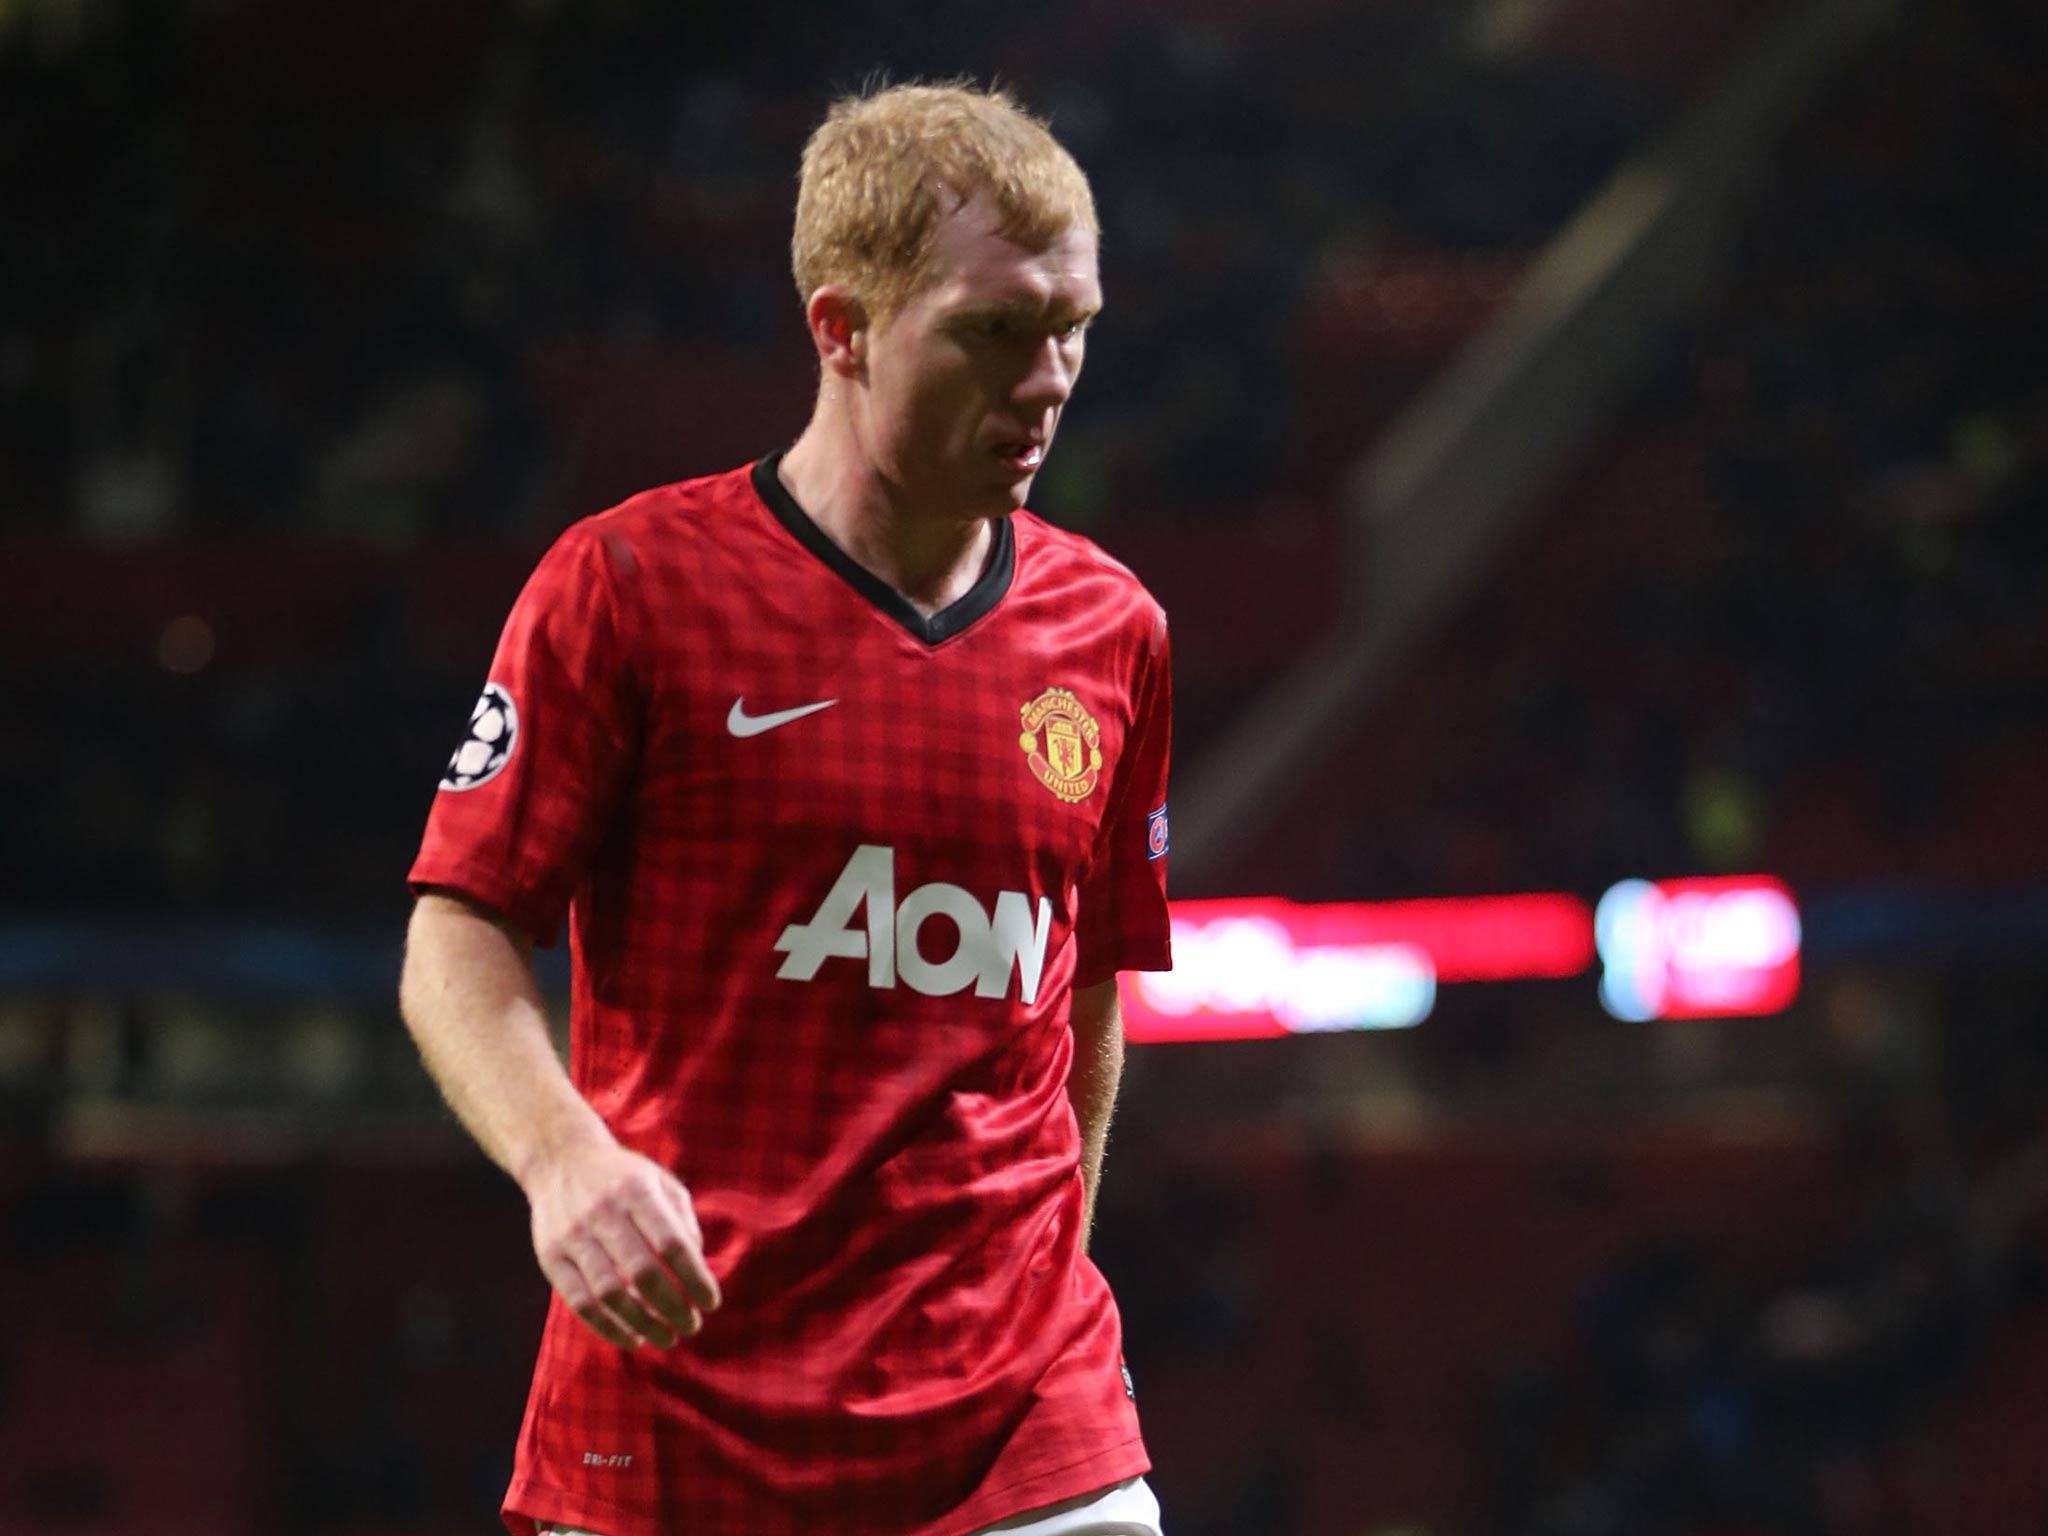 My Perfect Player feature with Man Utd legend Paul Scholes